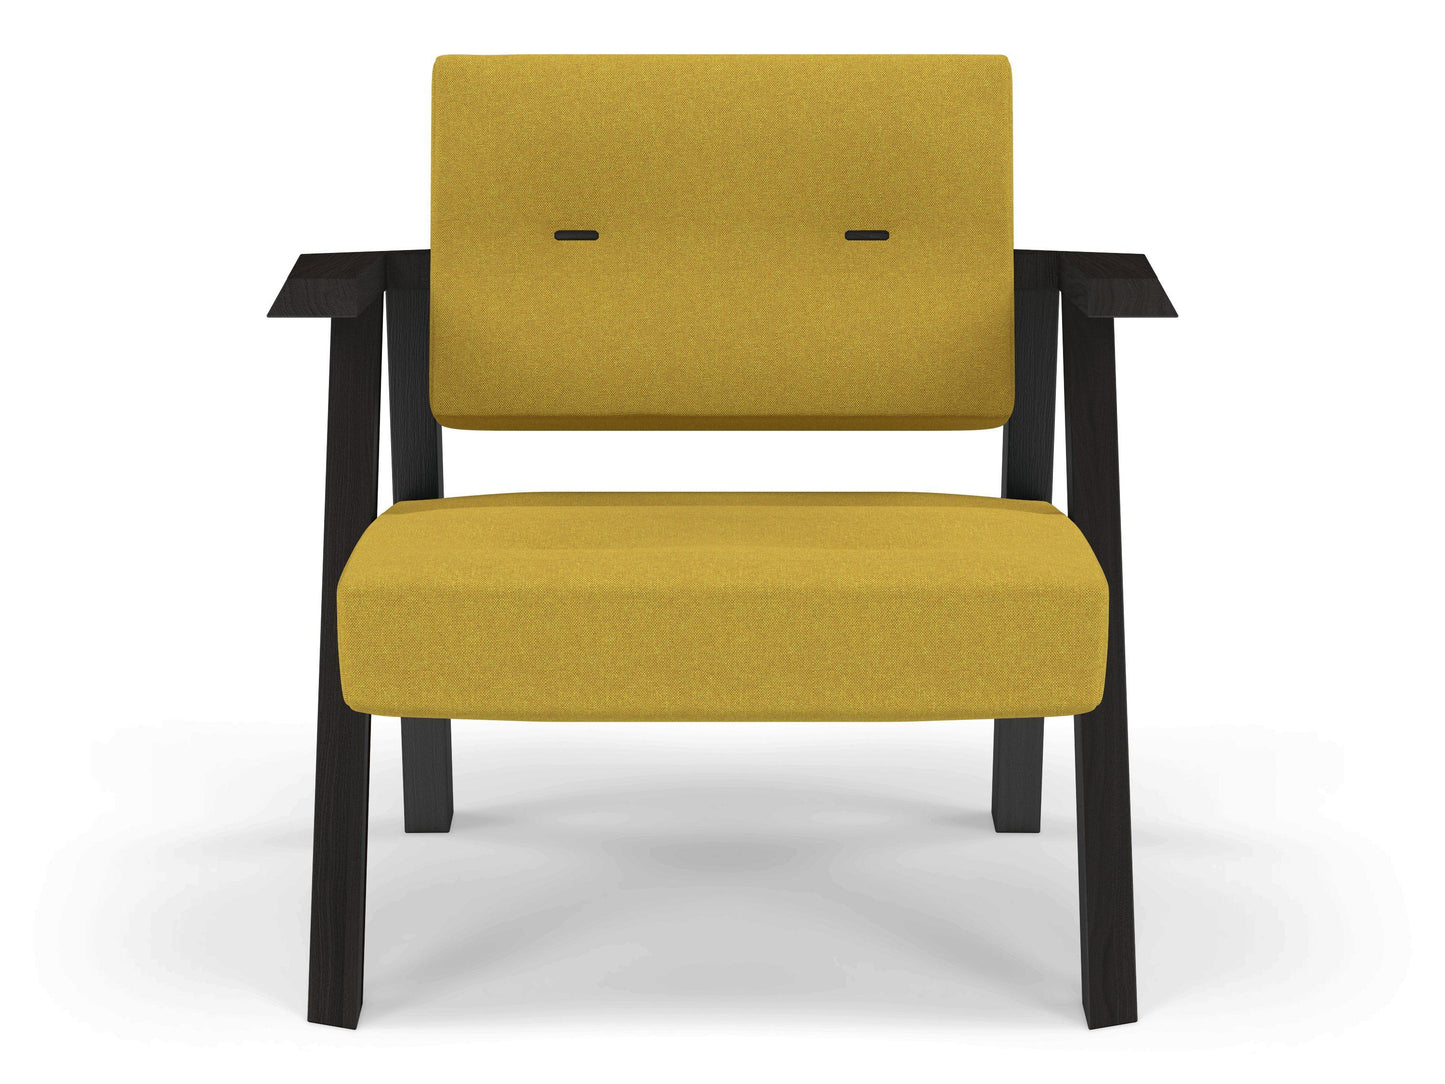 Classic Mid-century Design Armchair with Buttons in Mustard Yellow Fabric-Wenge Oak-Distinct Designs (London) Ltd